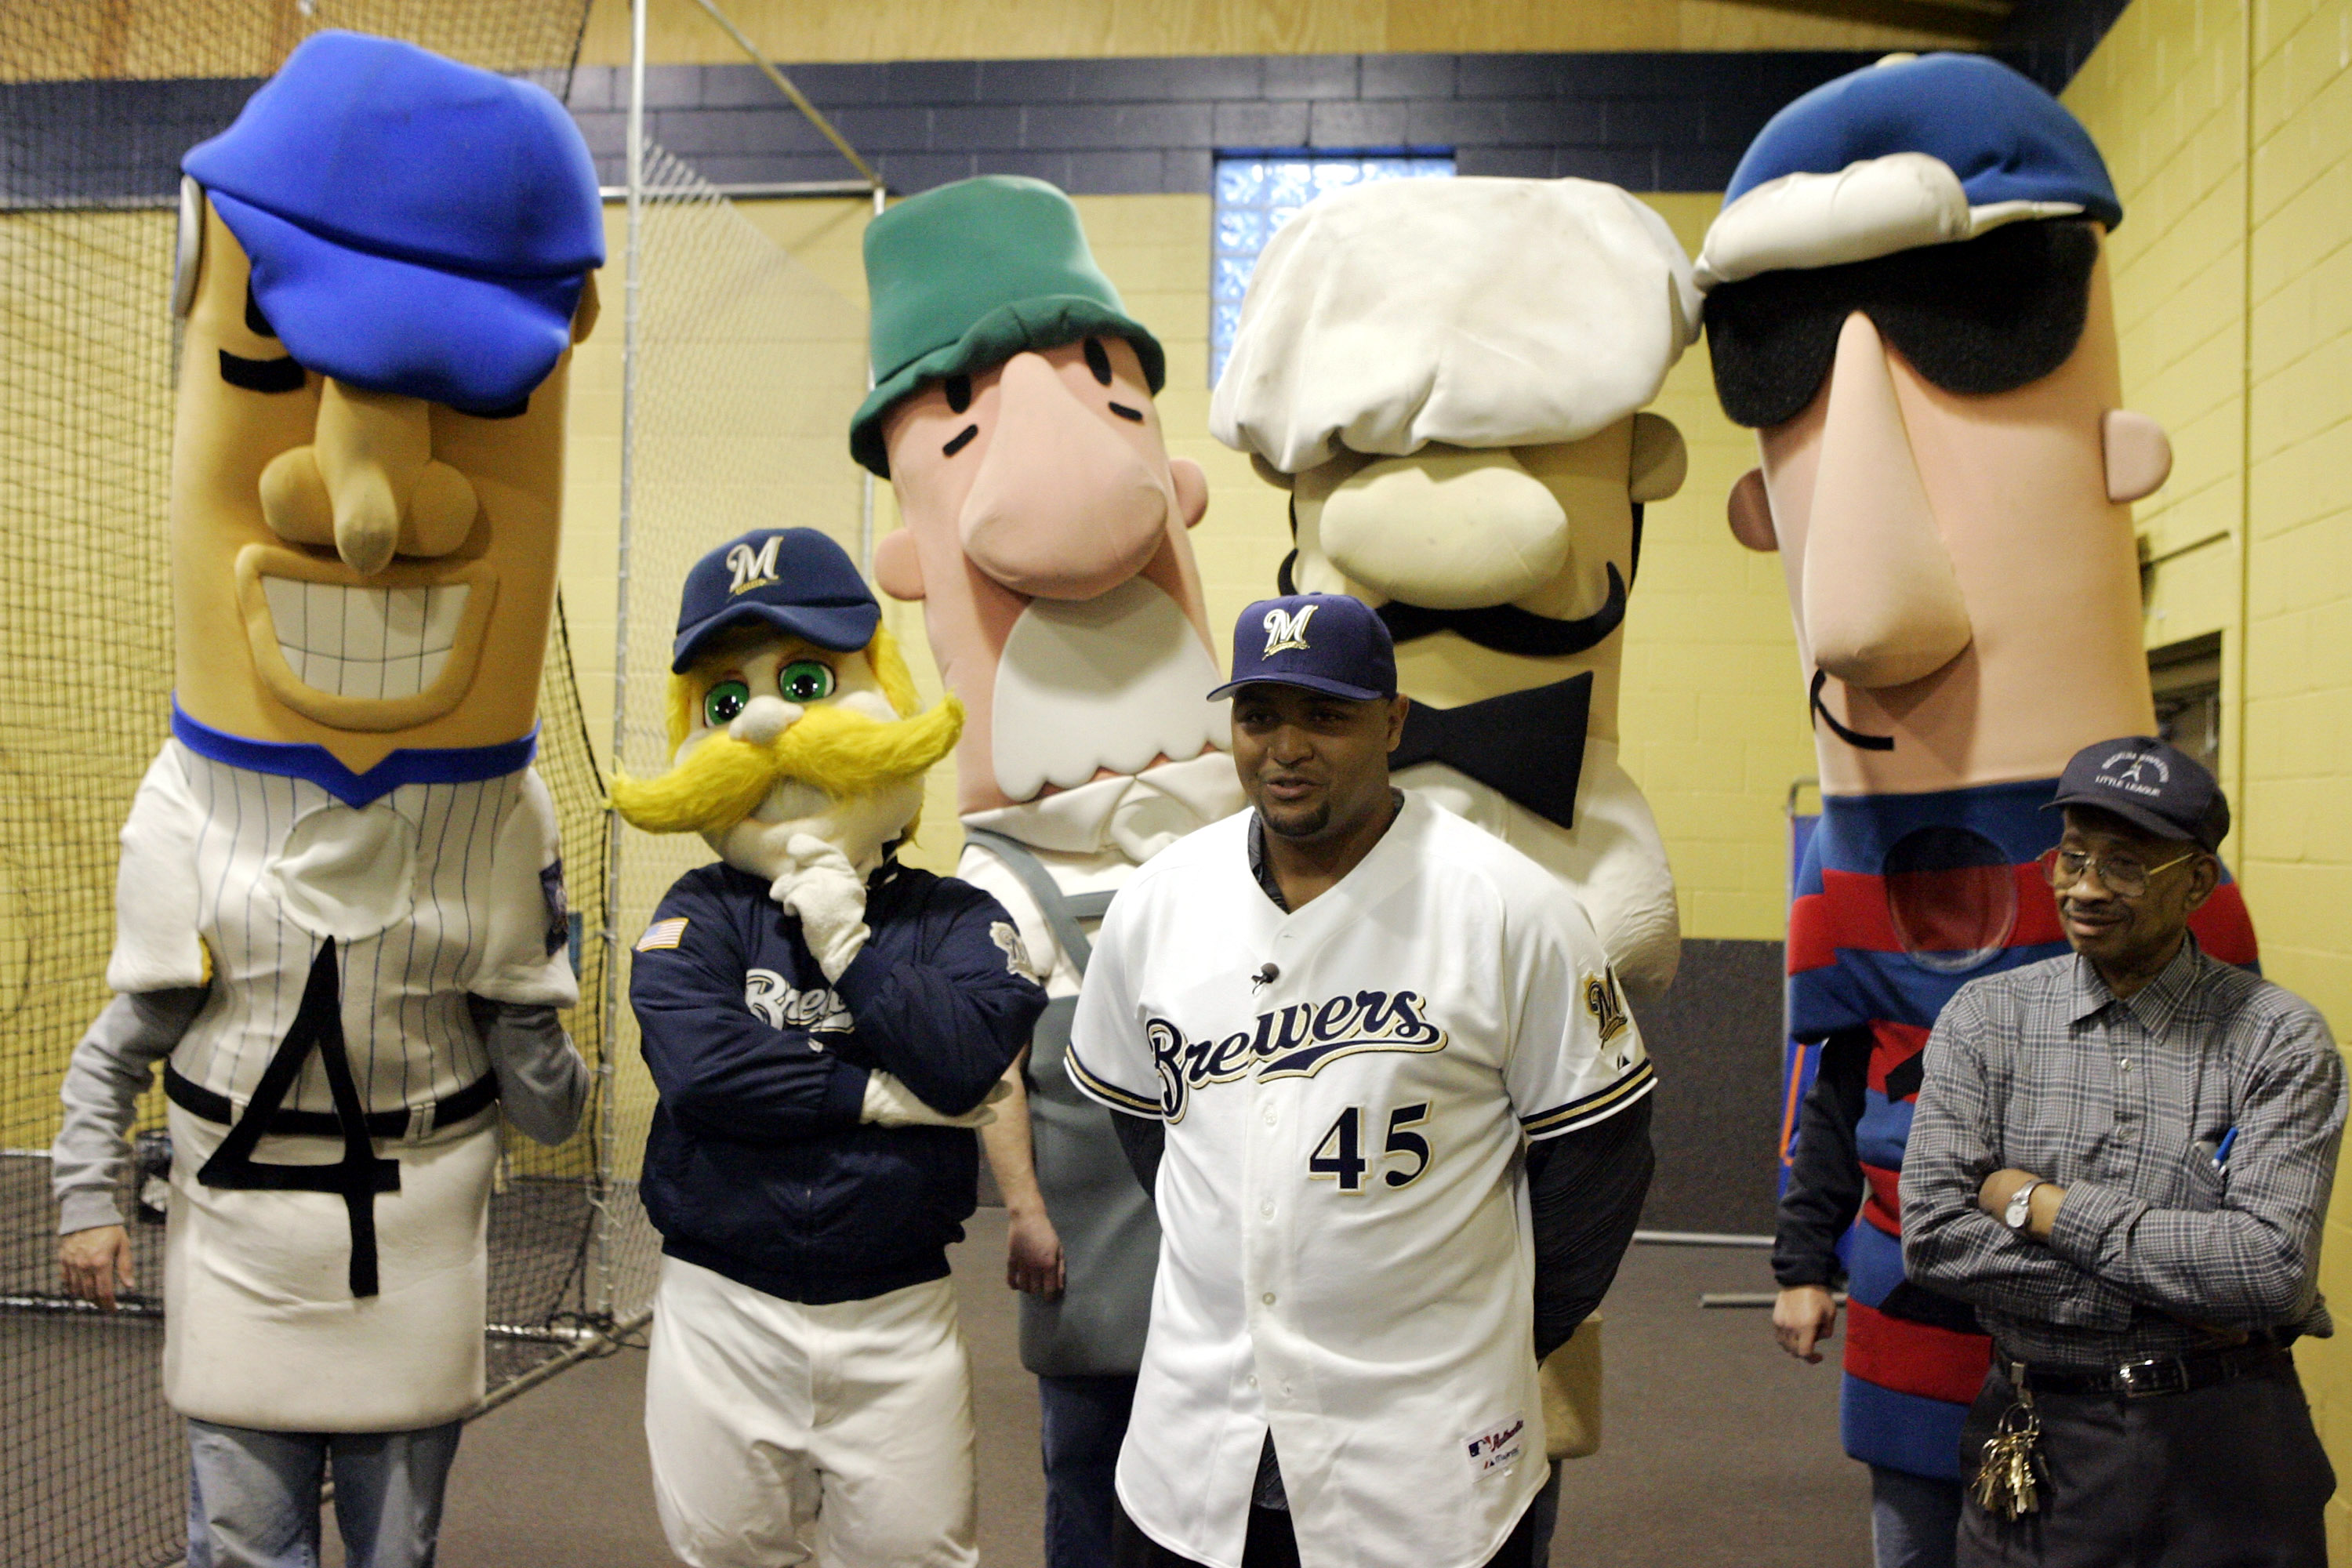 MILWAUKEE - JANUARY 10:  Carlos Lee, newly introduced as #45 of the Milwaukee Brewers, speaks to inner-city little league kids with the Brewer mascots behind him on January 10, 2005 at Beckum Stapleton Field in Milwaukee, Wisconsin.  (Photo by Brian Bahr/